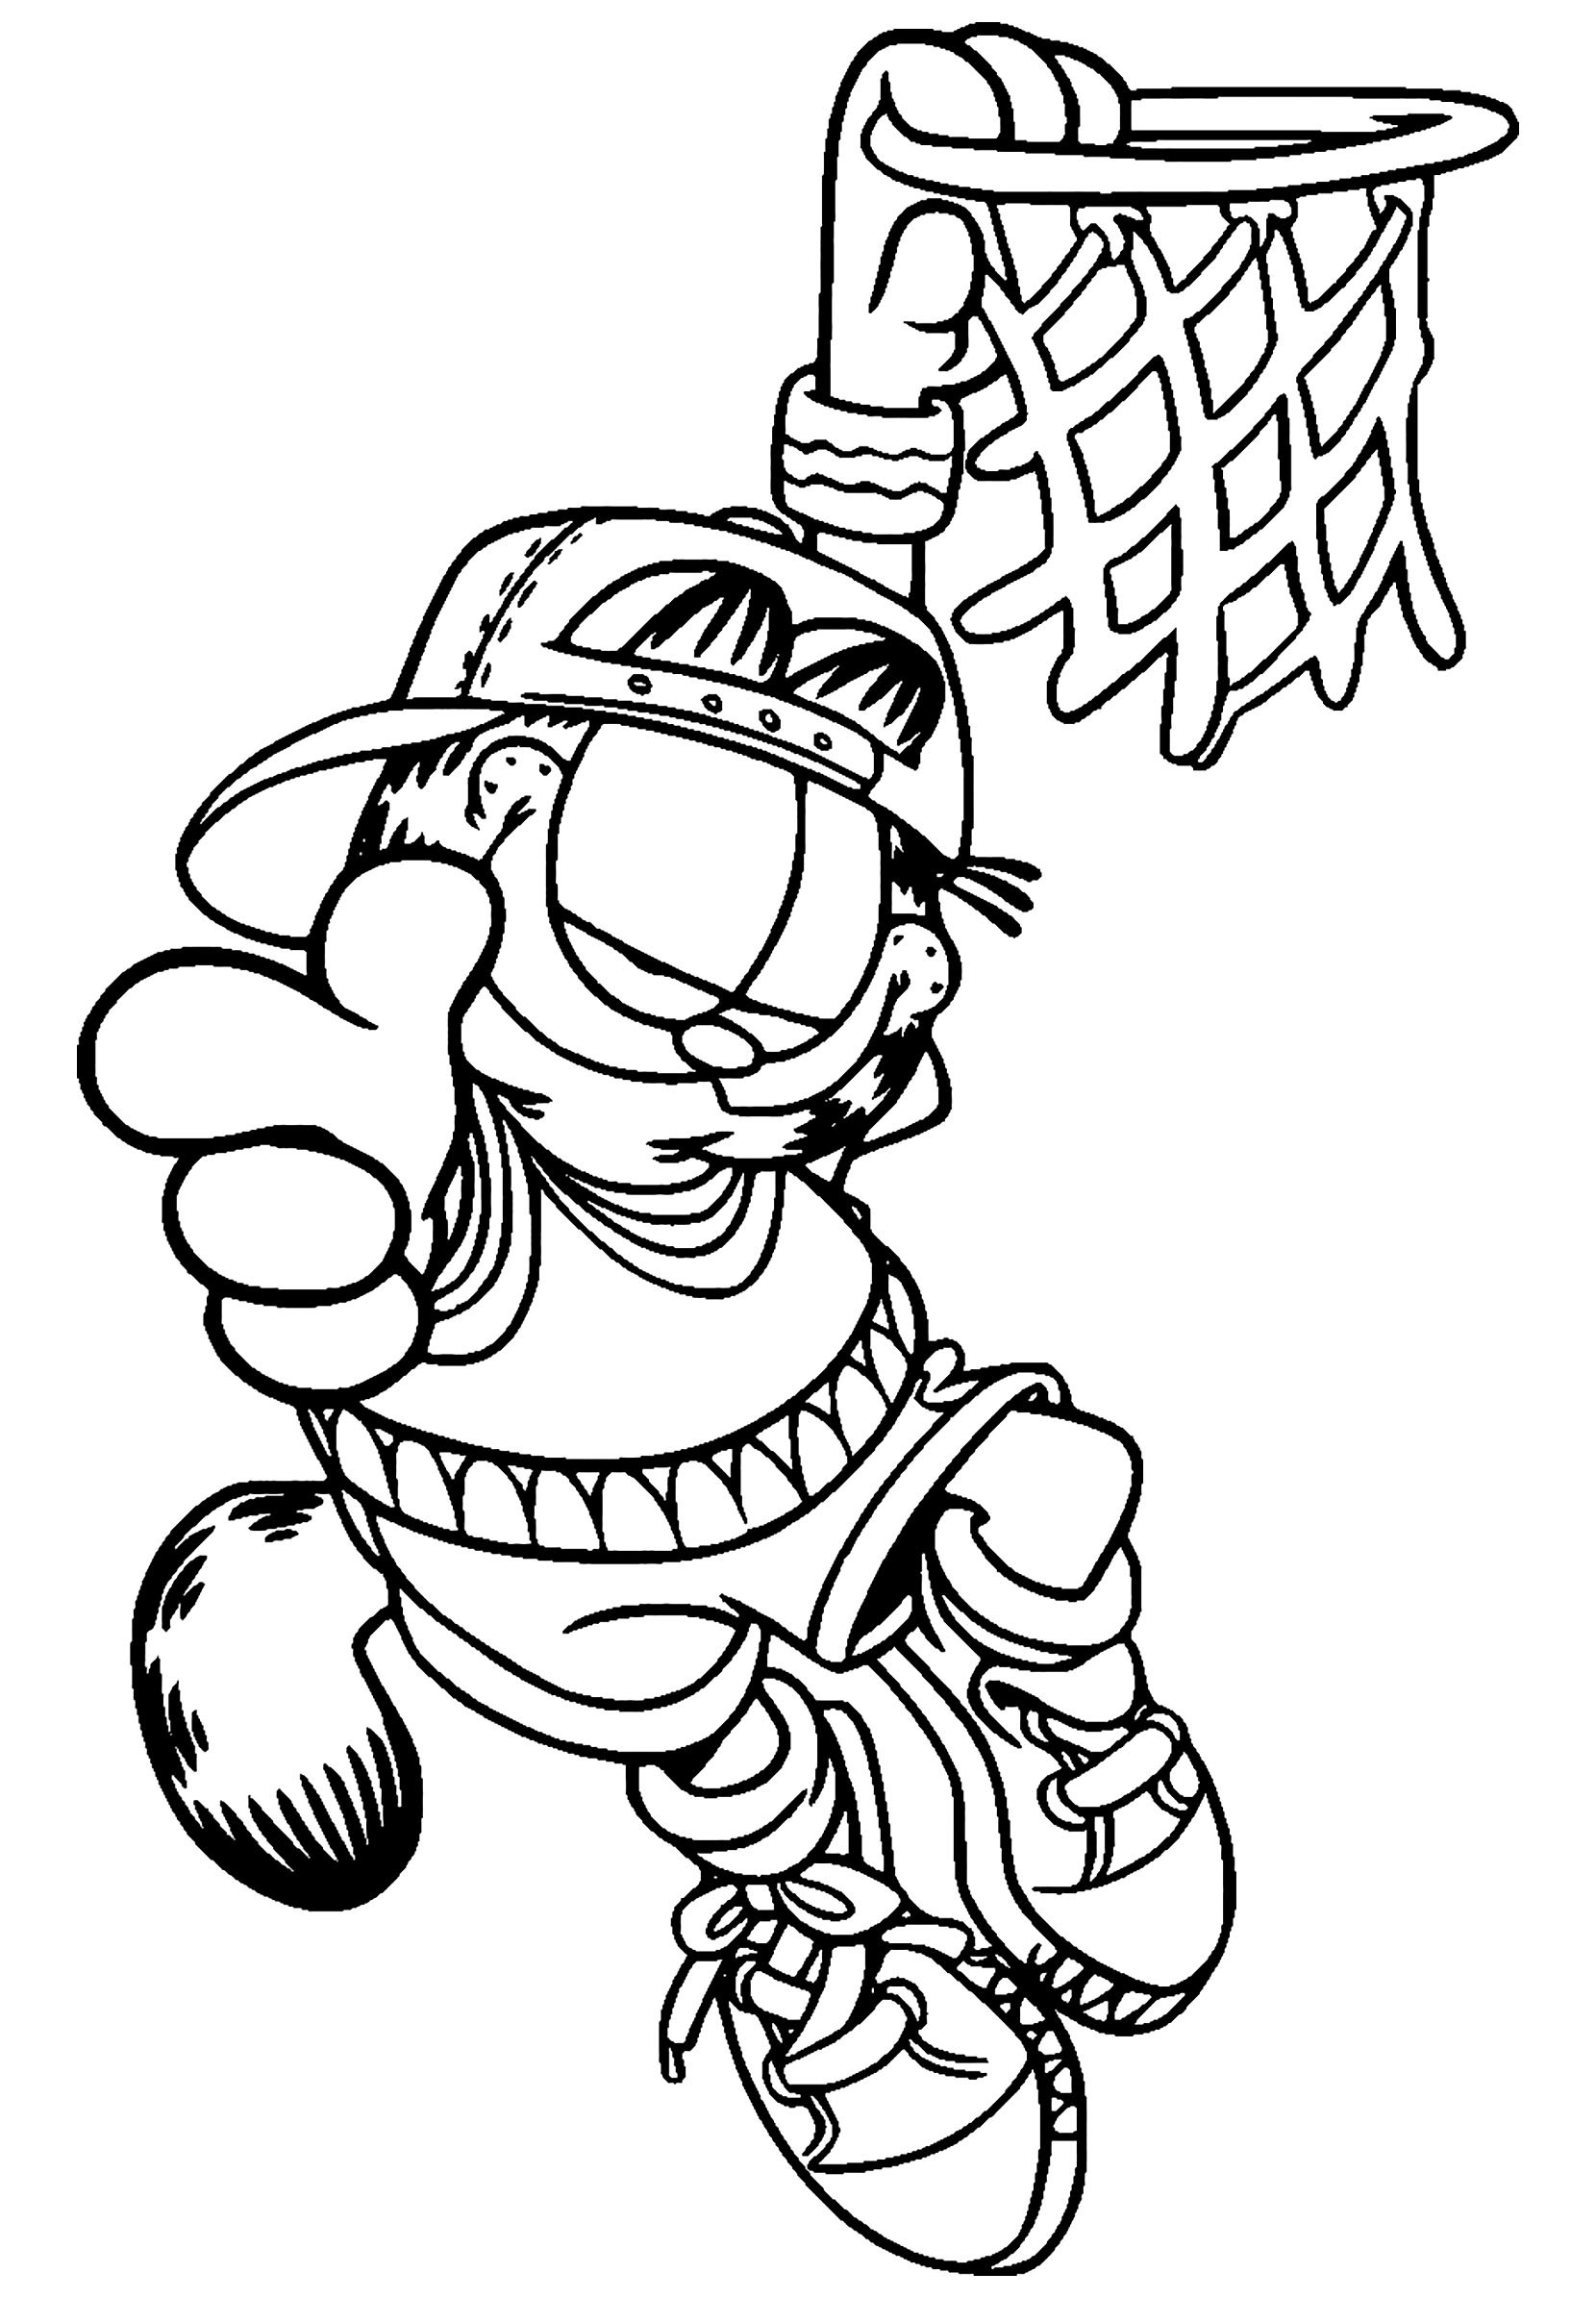 Printable Coloring Pages Kids
 Garfield to Garfield Kids Coloring Pages